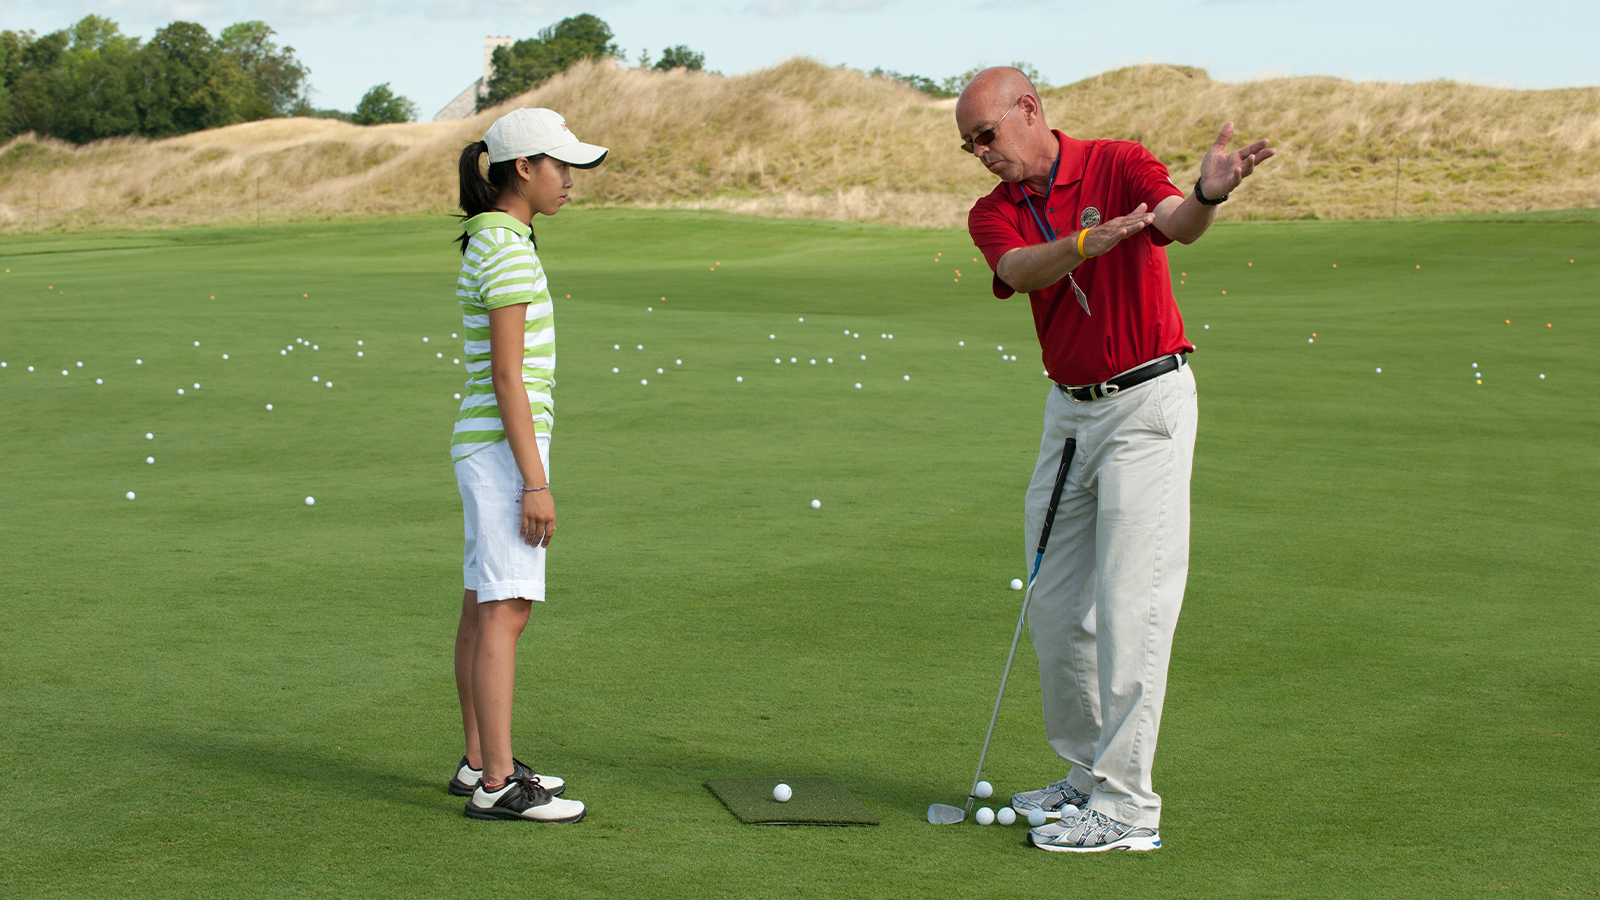 A Wisconsin Section PGA Professional works with a junior golfer on her form during a youth clinic. (Photo by Montana Pritchard/The PGA of America)